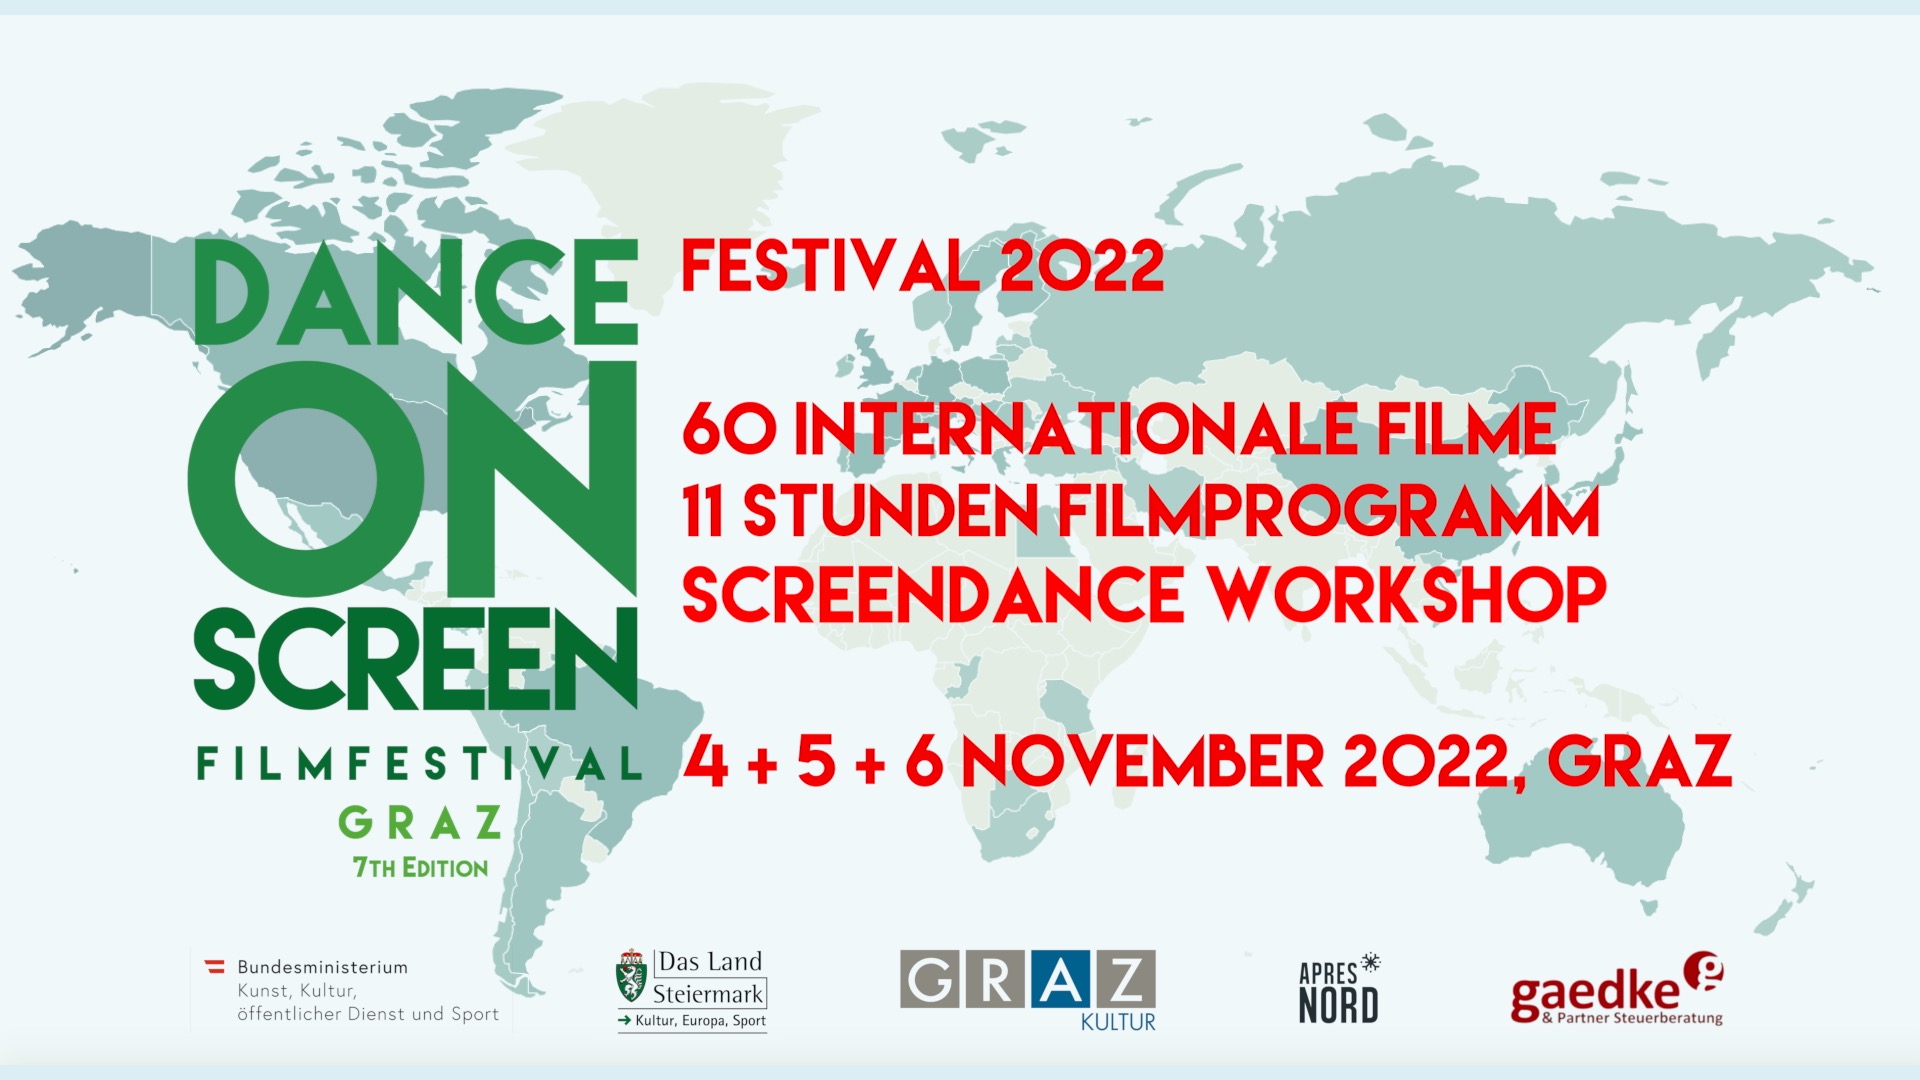 Dance On Screen FilmFestival 7th Edition (2022) approaching!!